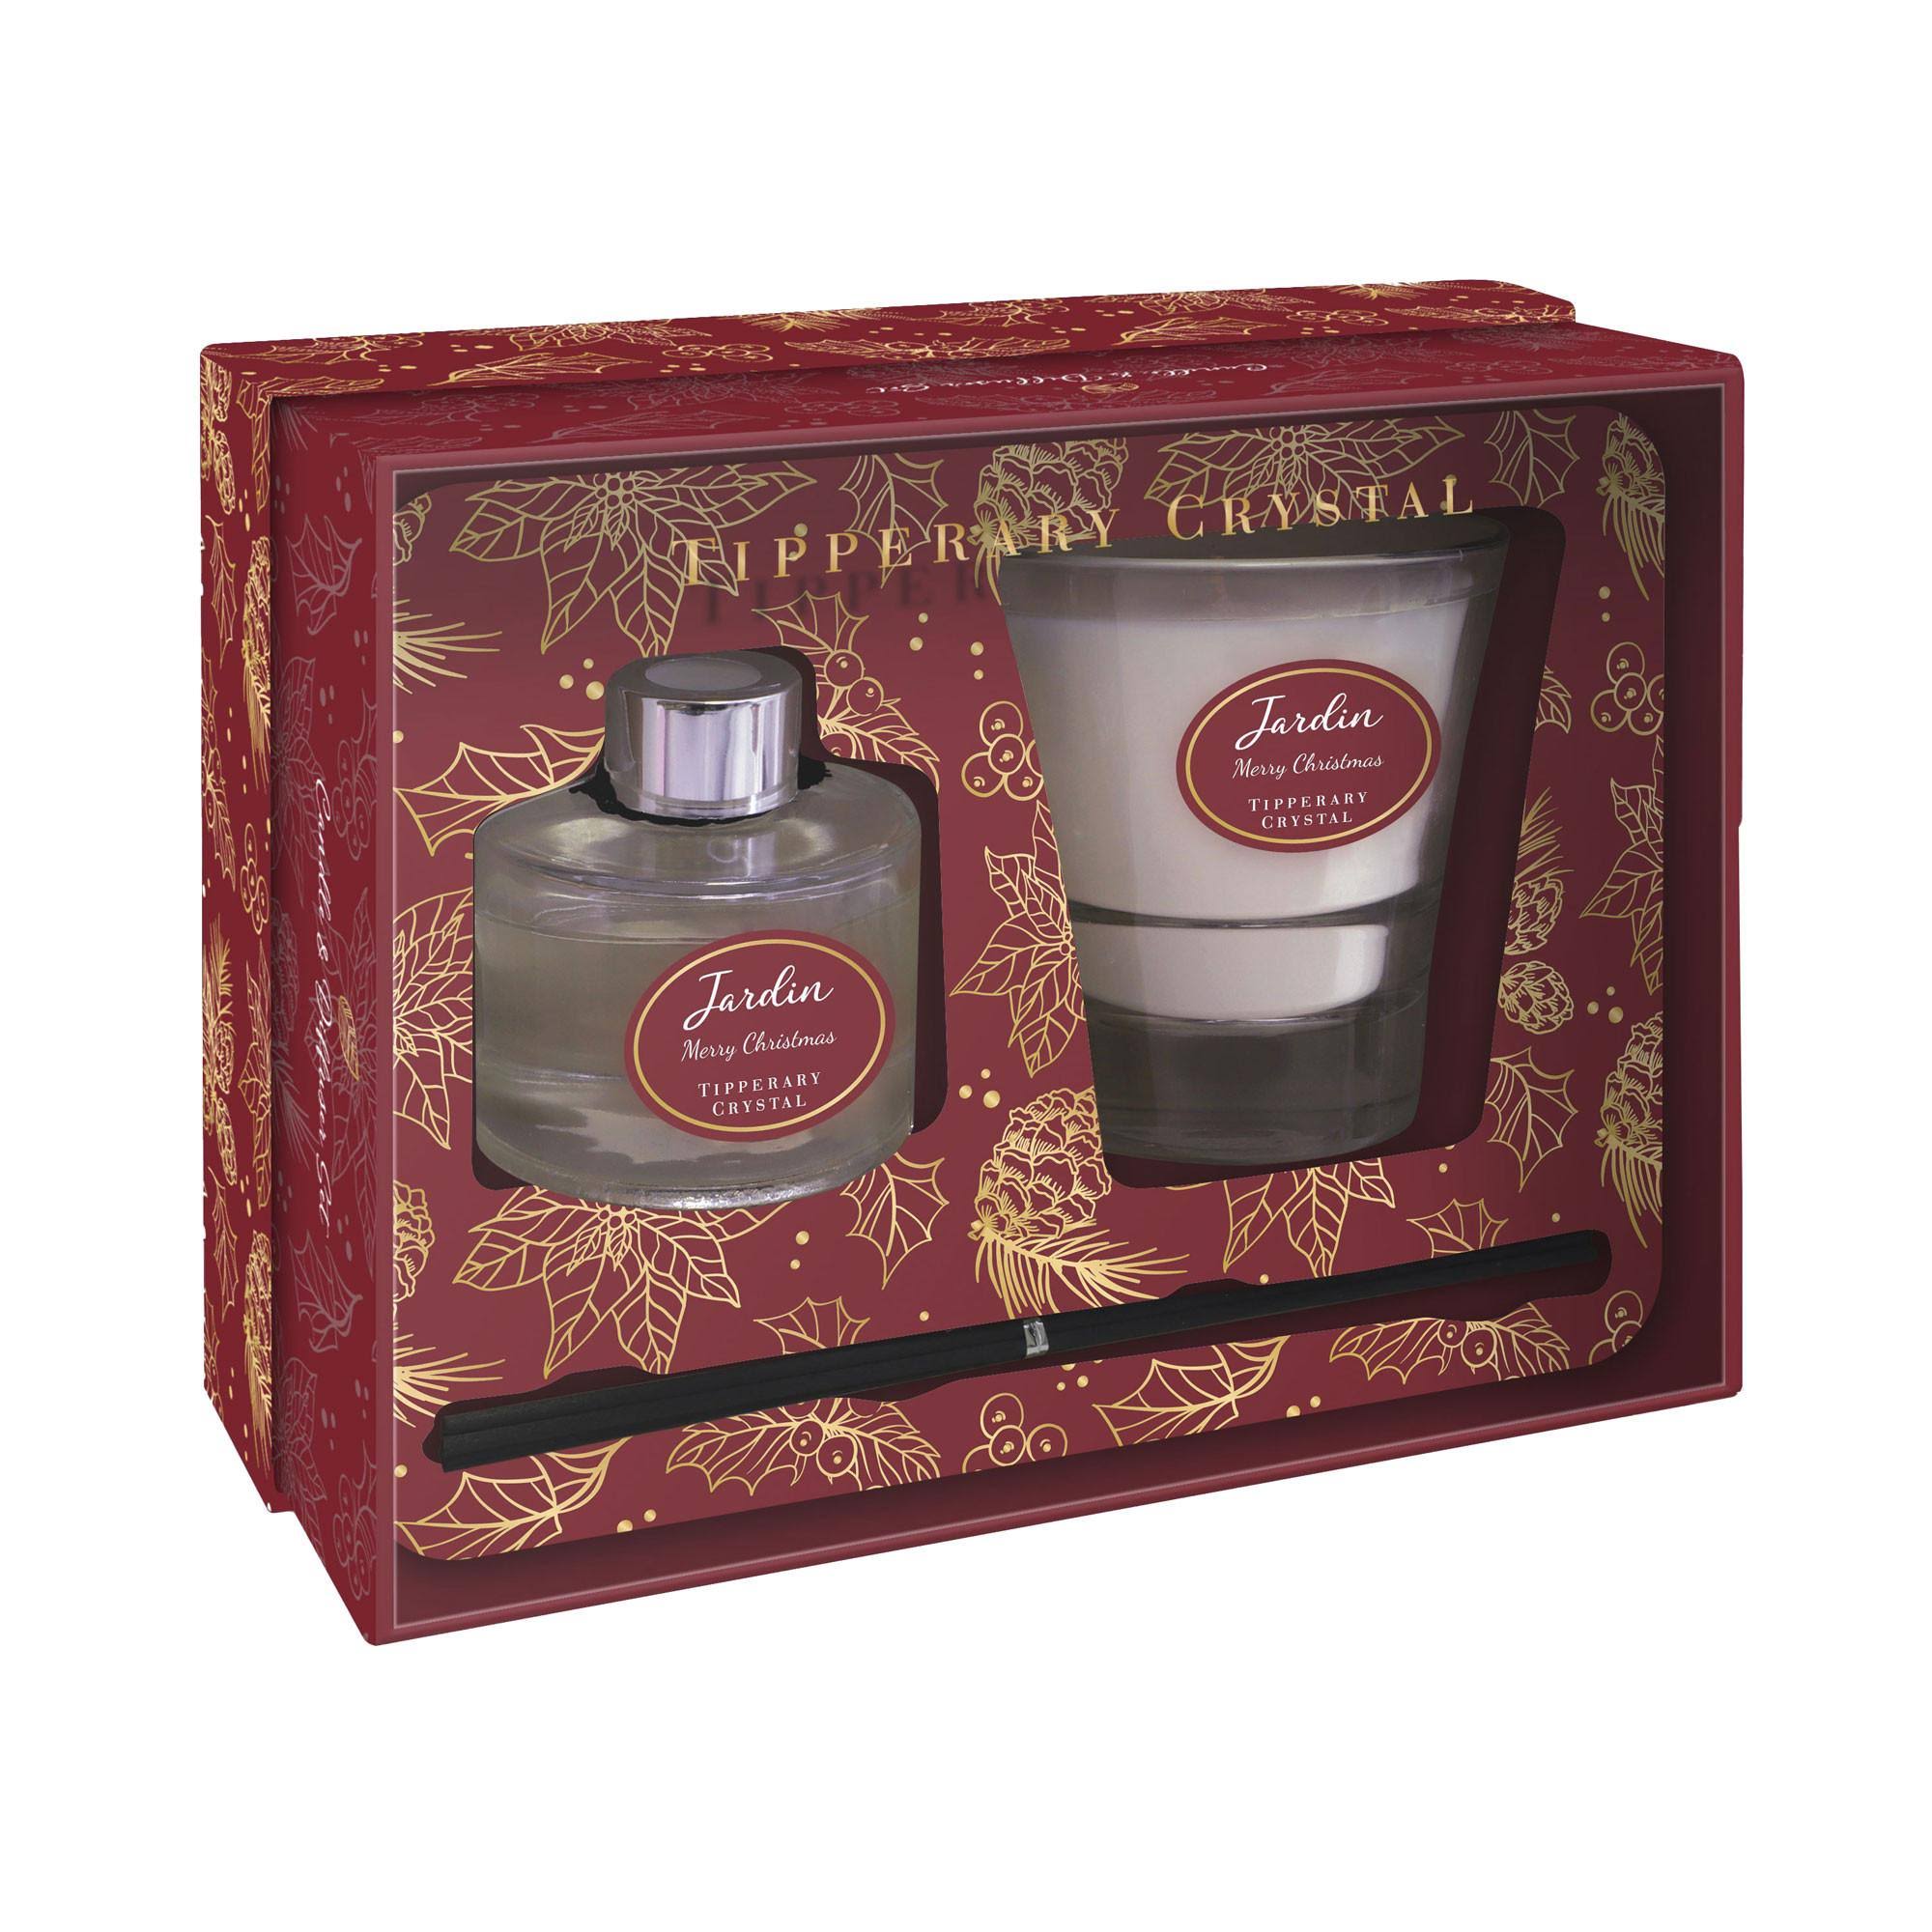 Tipperary Crystal Jardin Merry Christmas Scented Candle & Diffuser Set